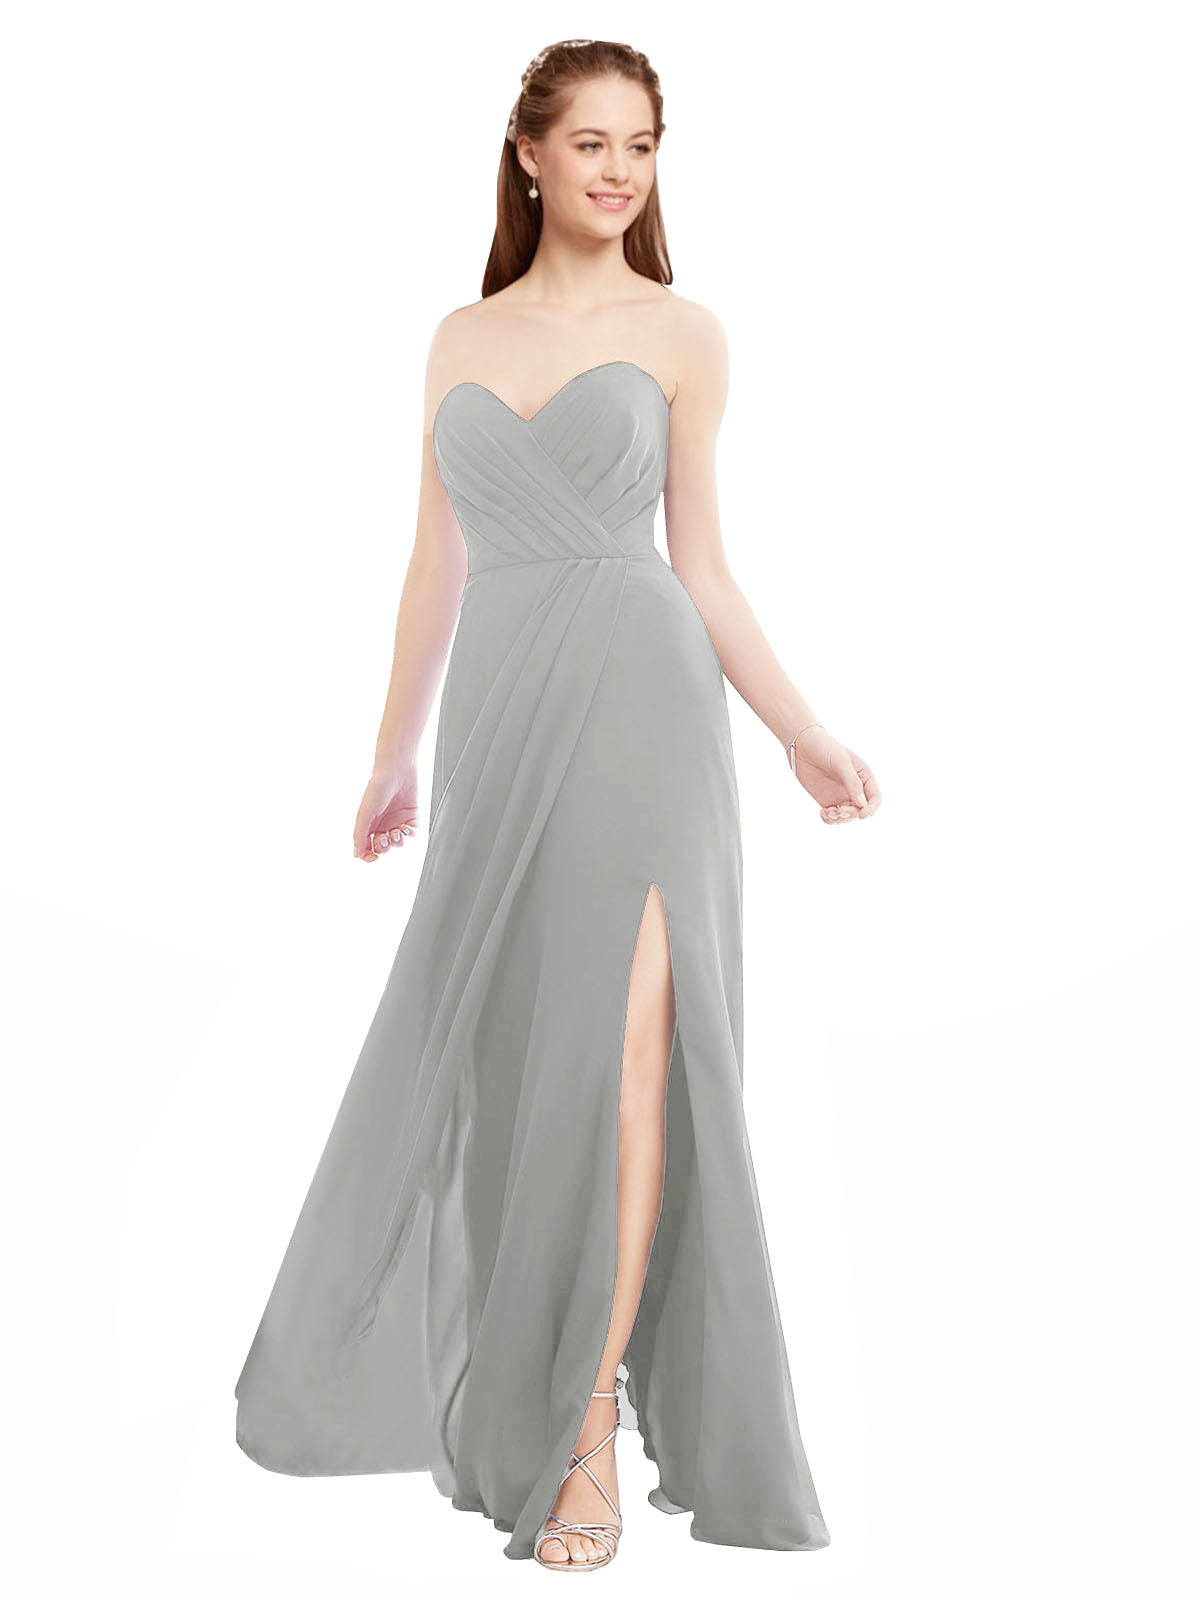 Silver A-Line Sweetheart Strapless Sleeveless Long Bridesmaid Dress Meadow